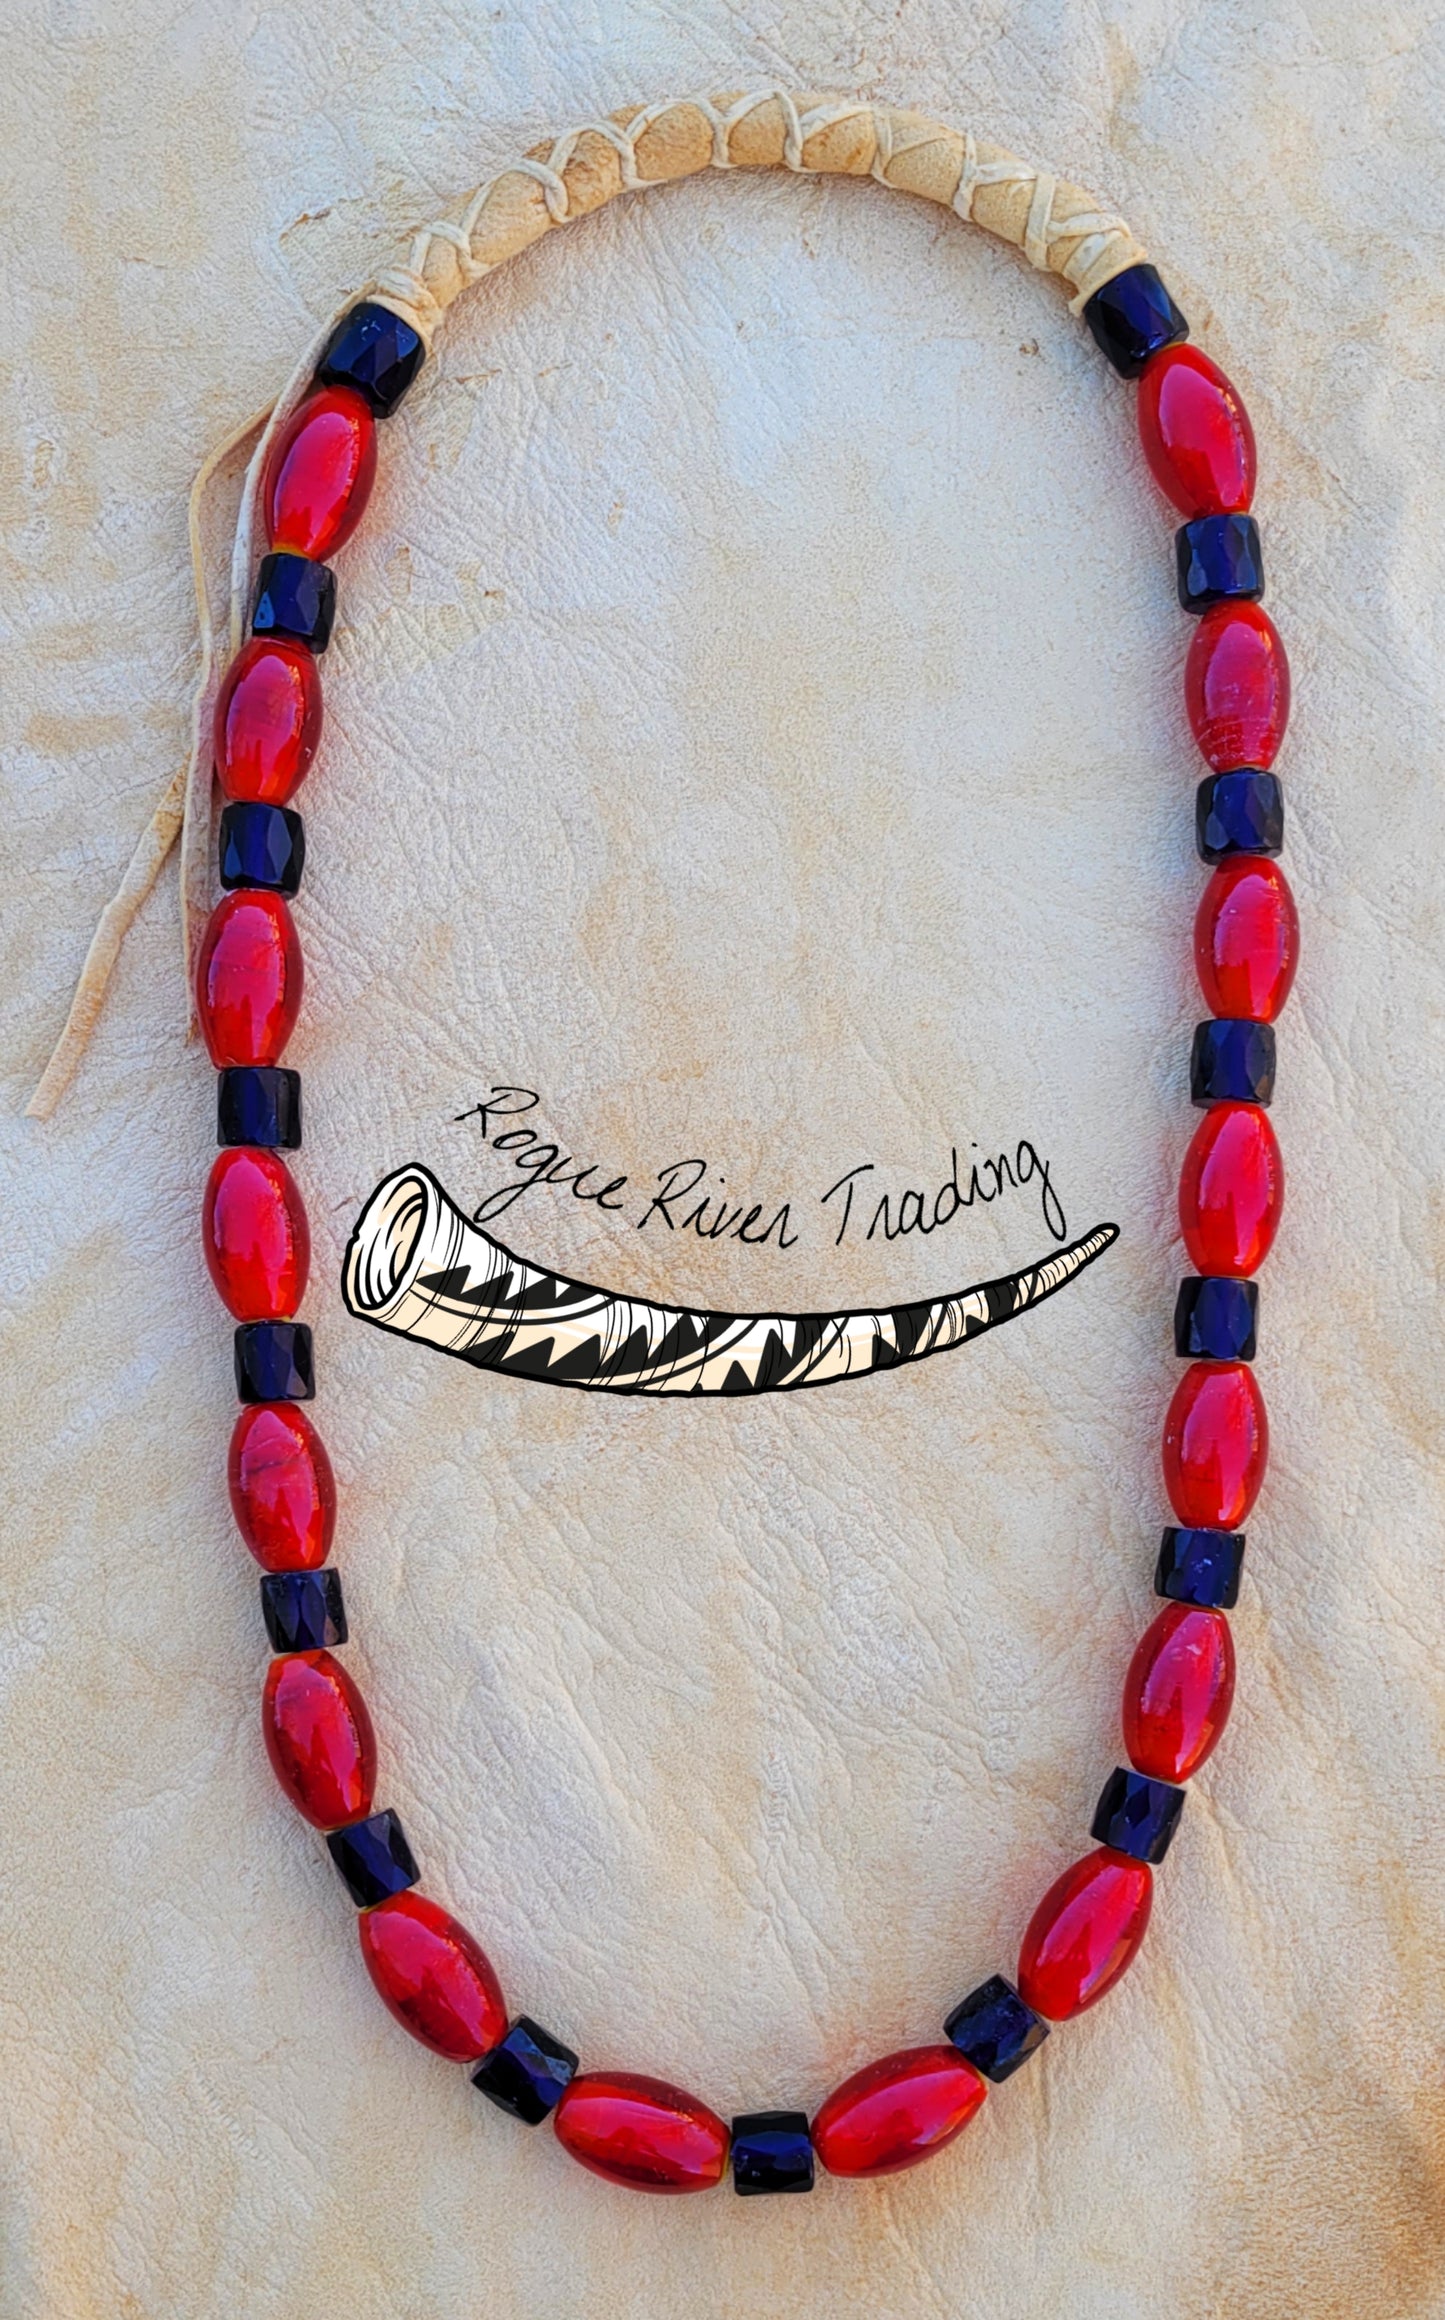 1 of a Kind Necklaces made with Rogue River trade beads.